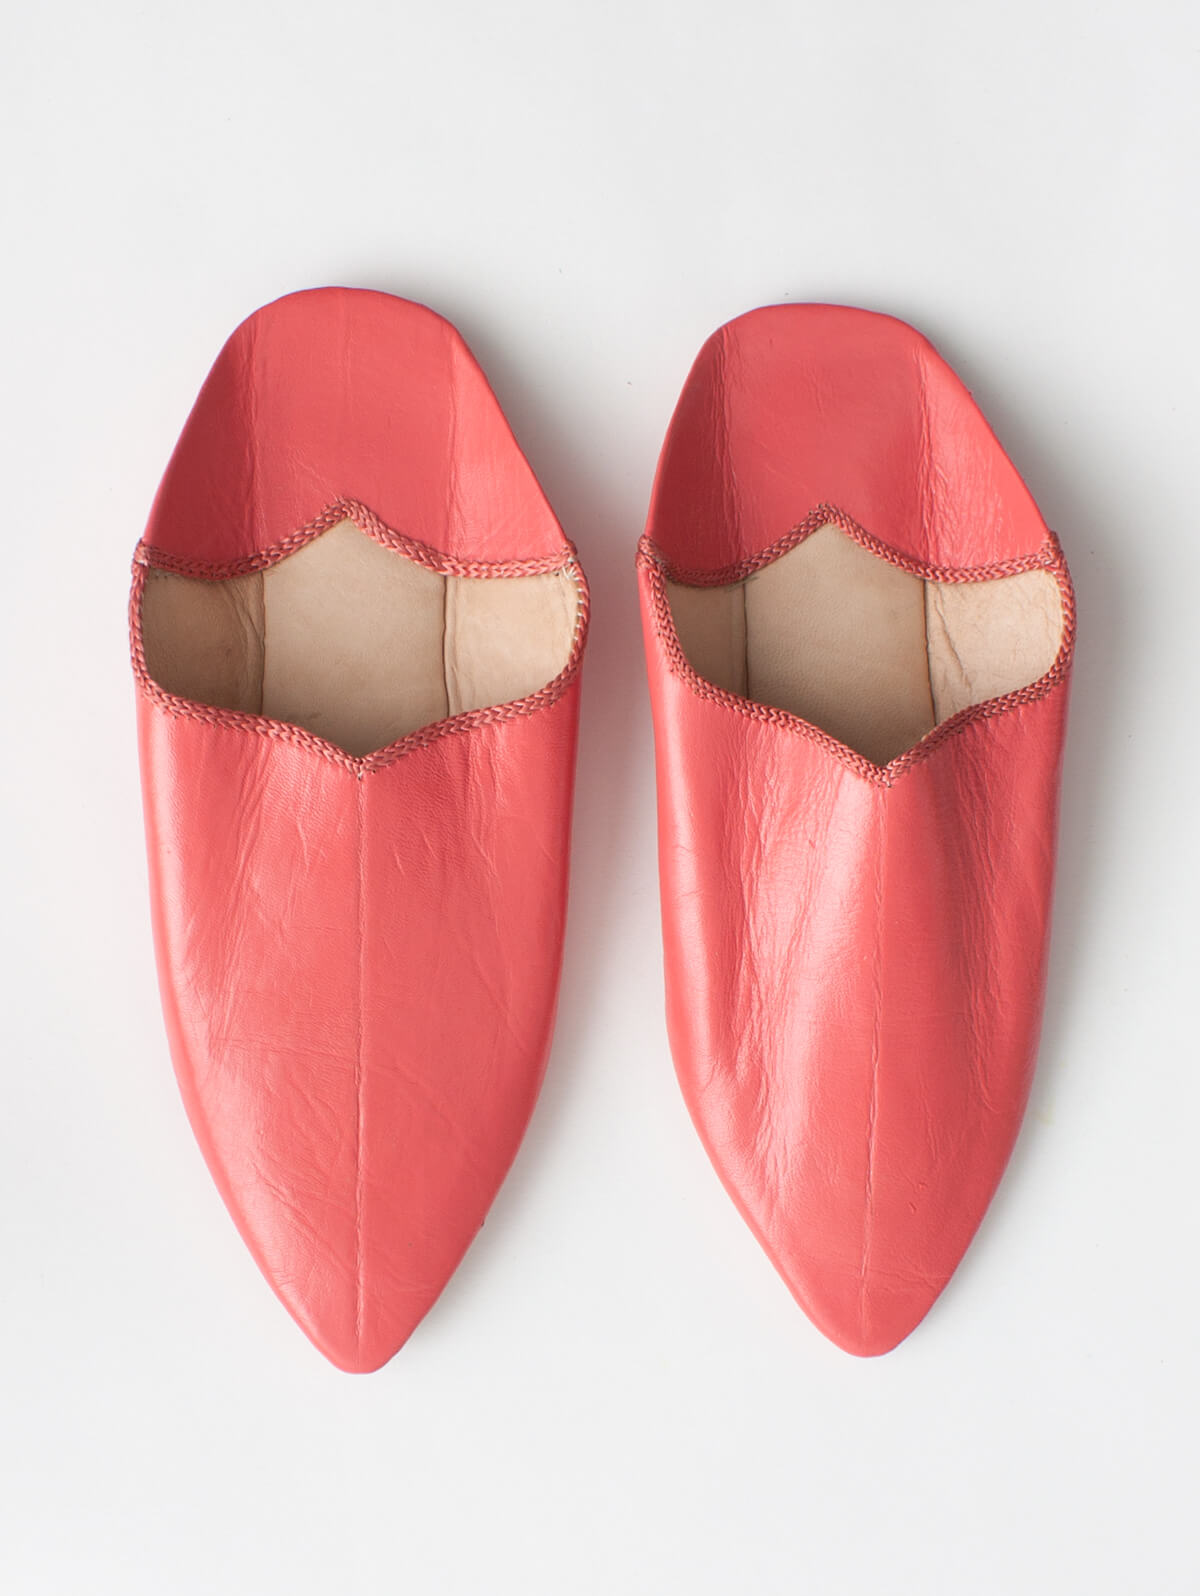 Moroccan Plain Pointed Babouche Slippers, Coral